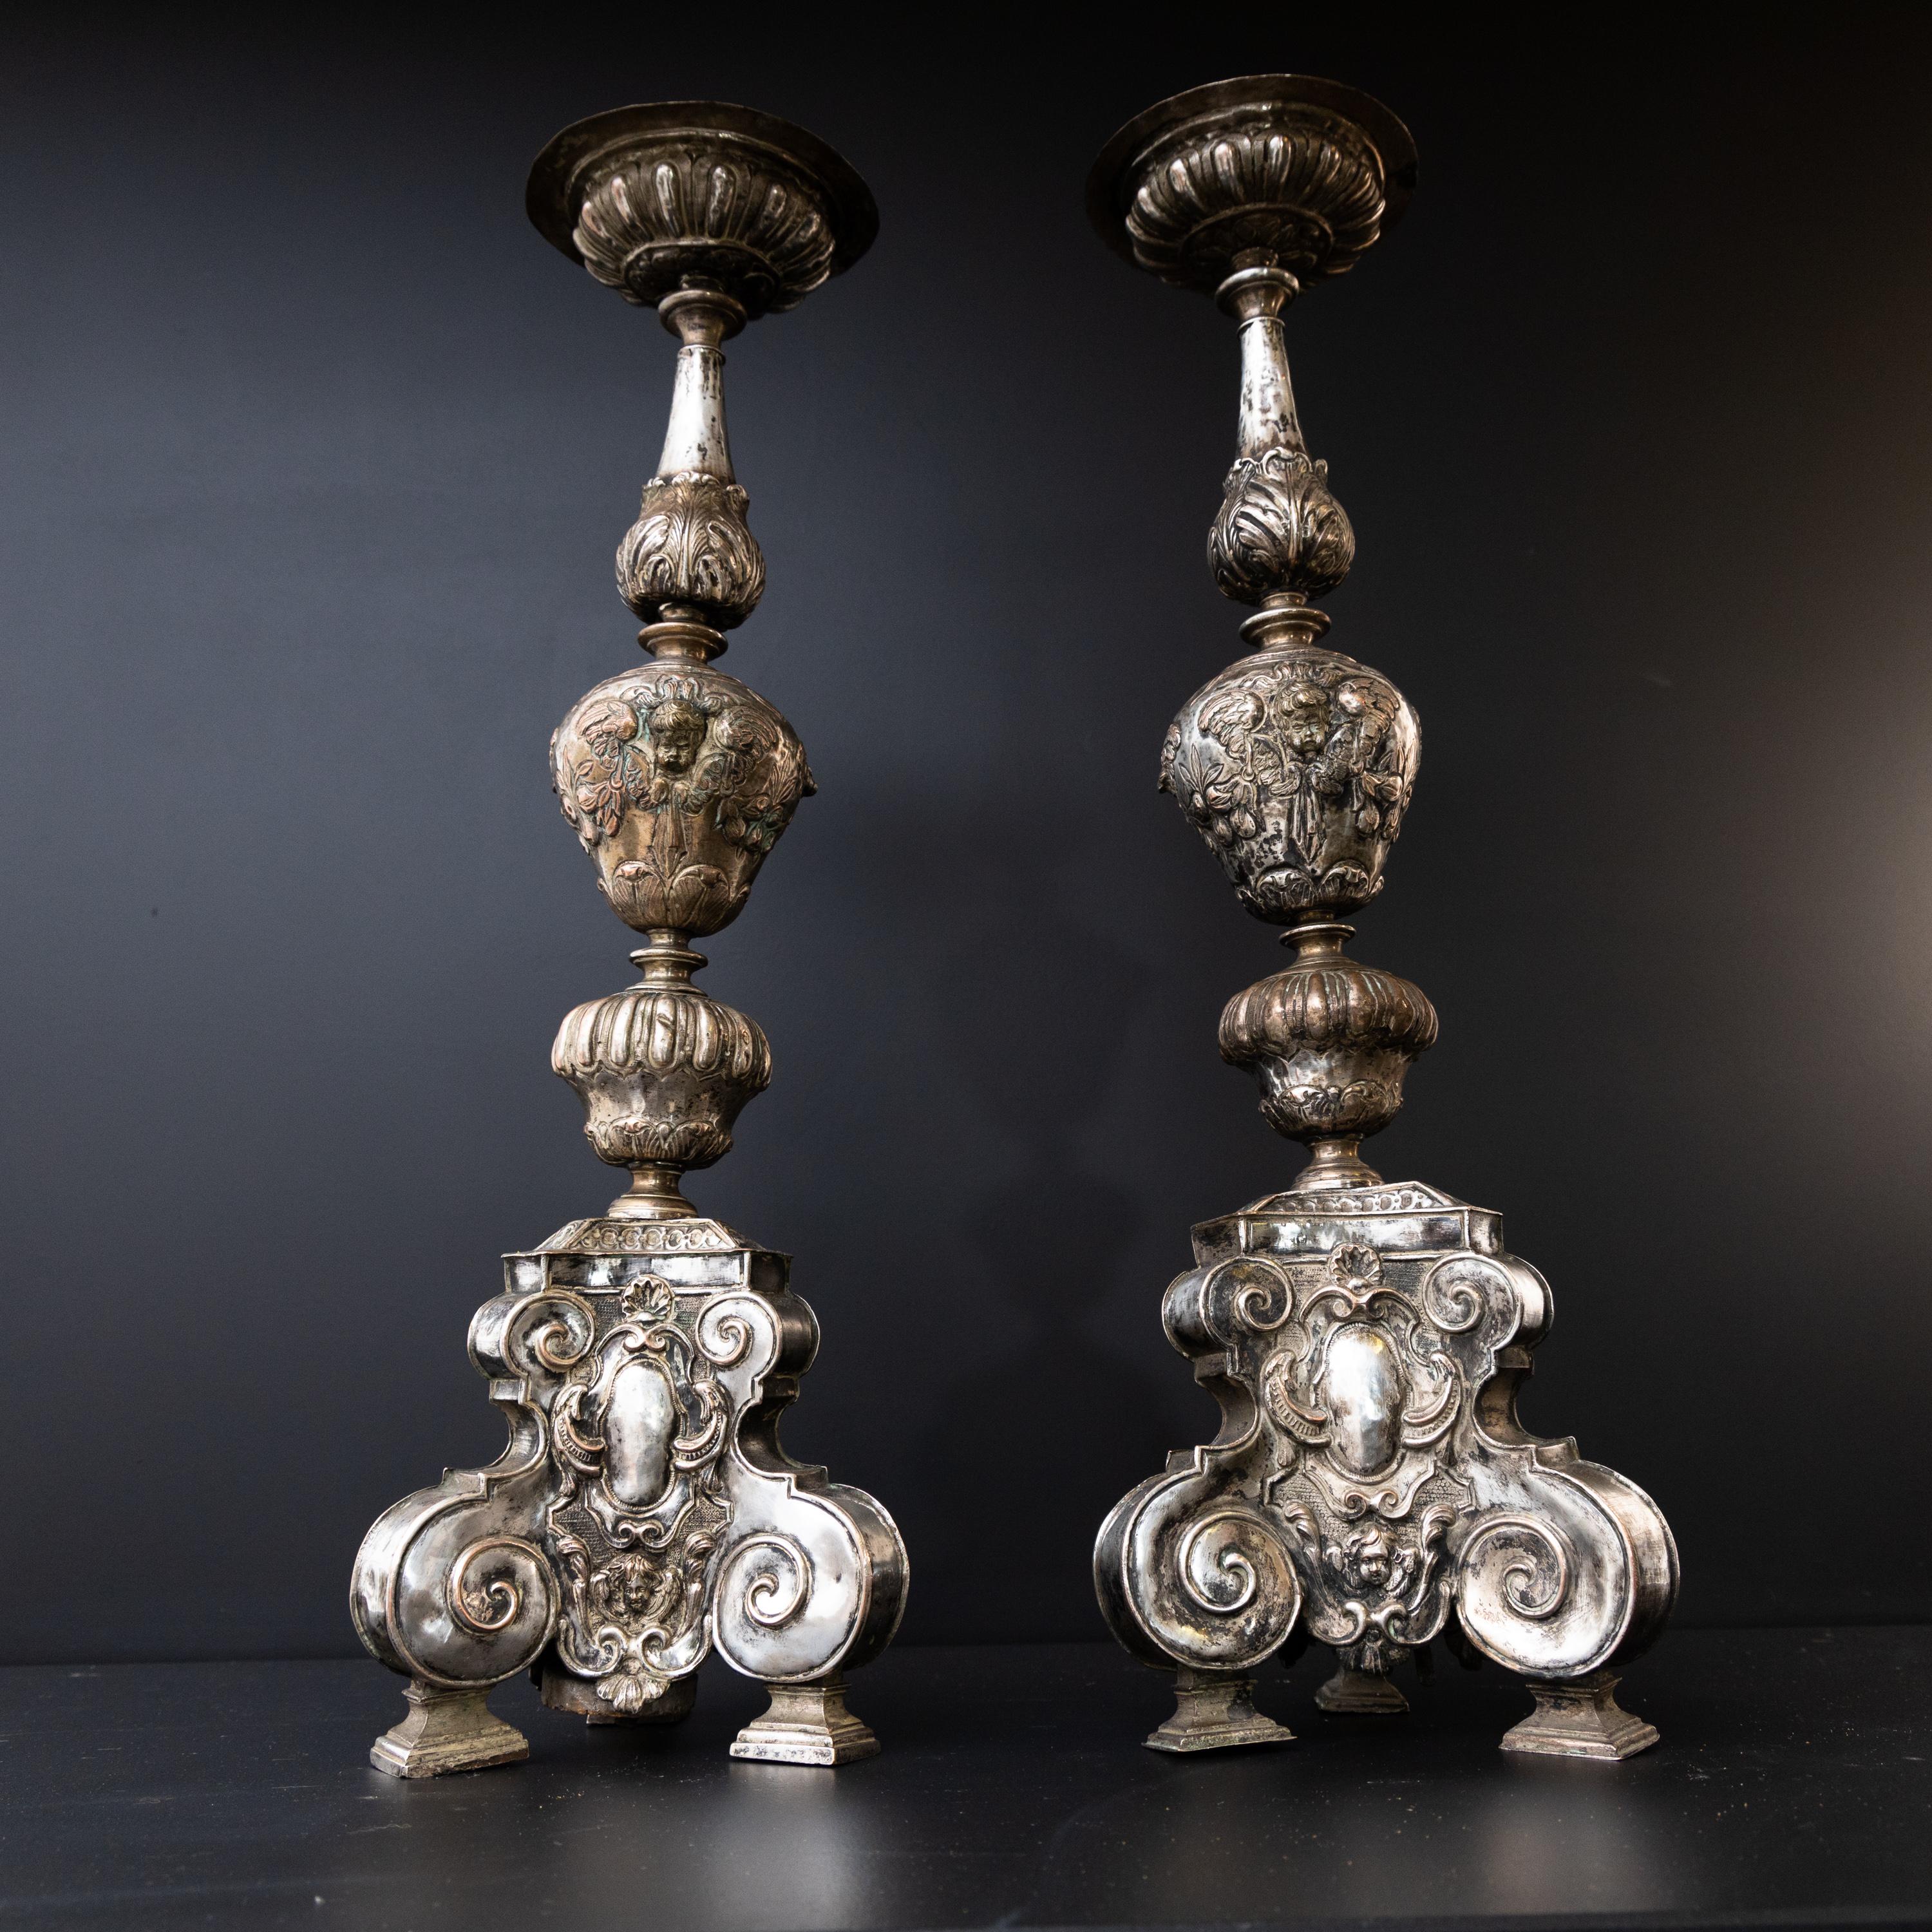 Italian Pair of Silver-Plated Altar Candlesticks, Italy, 17th Century